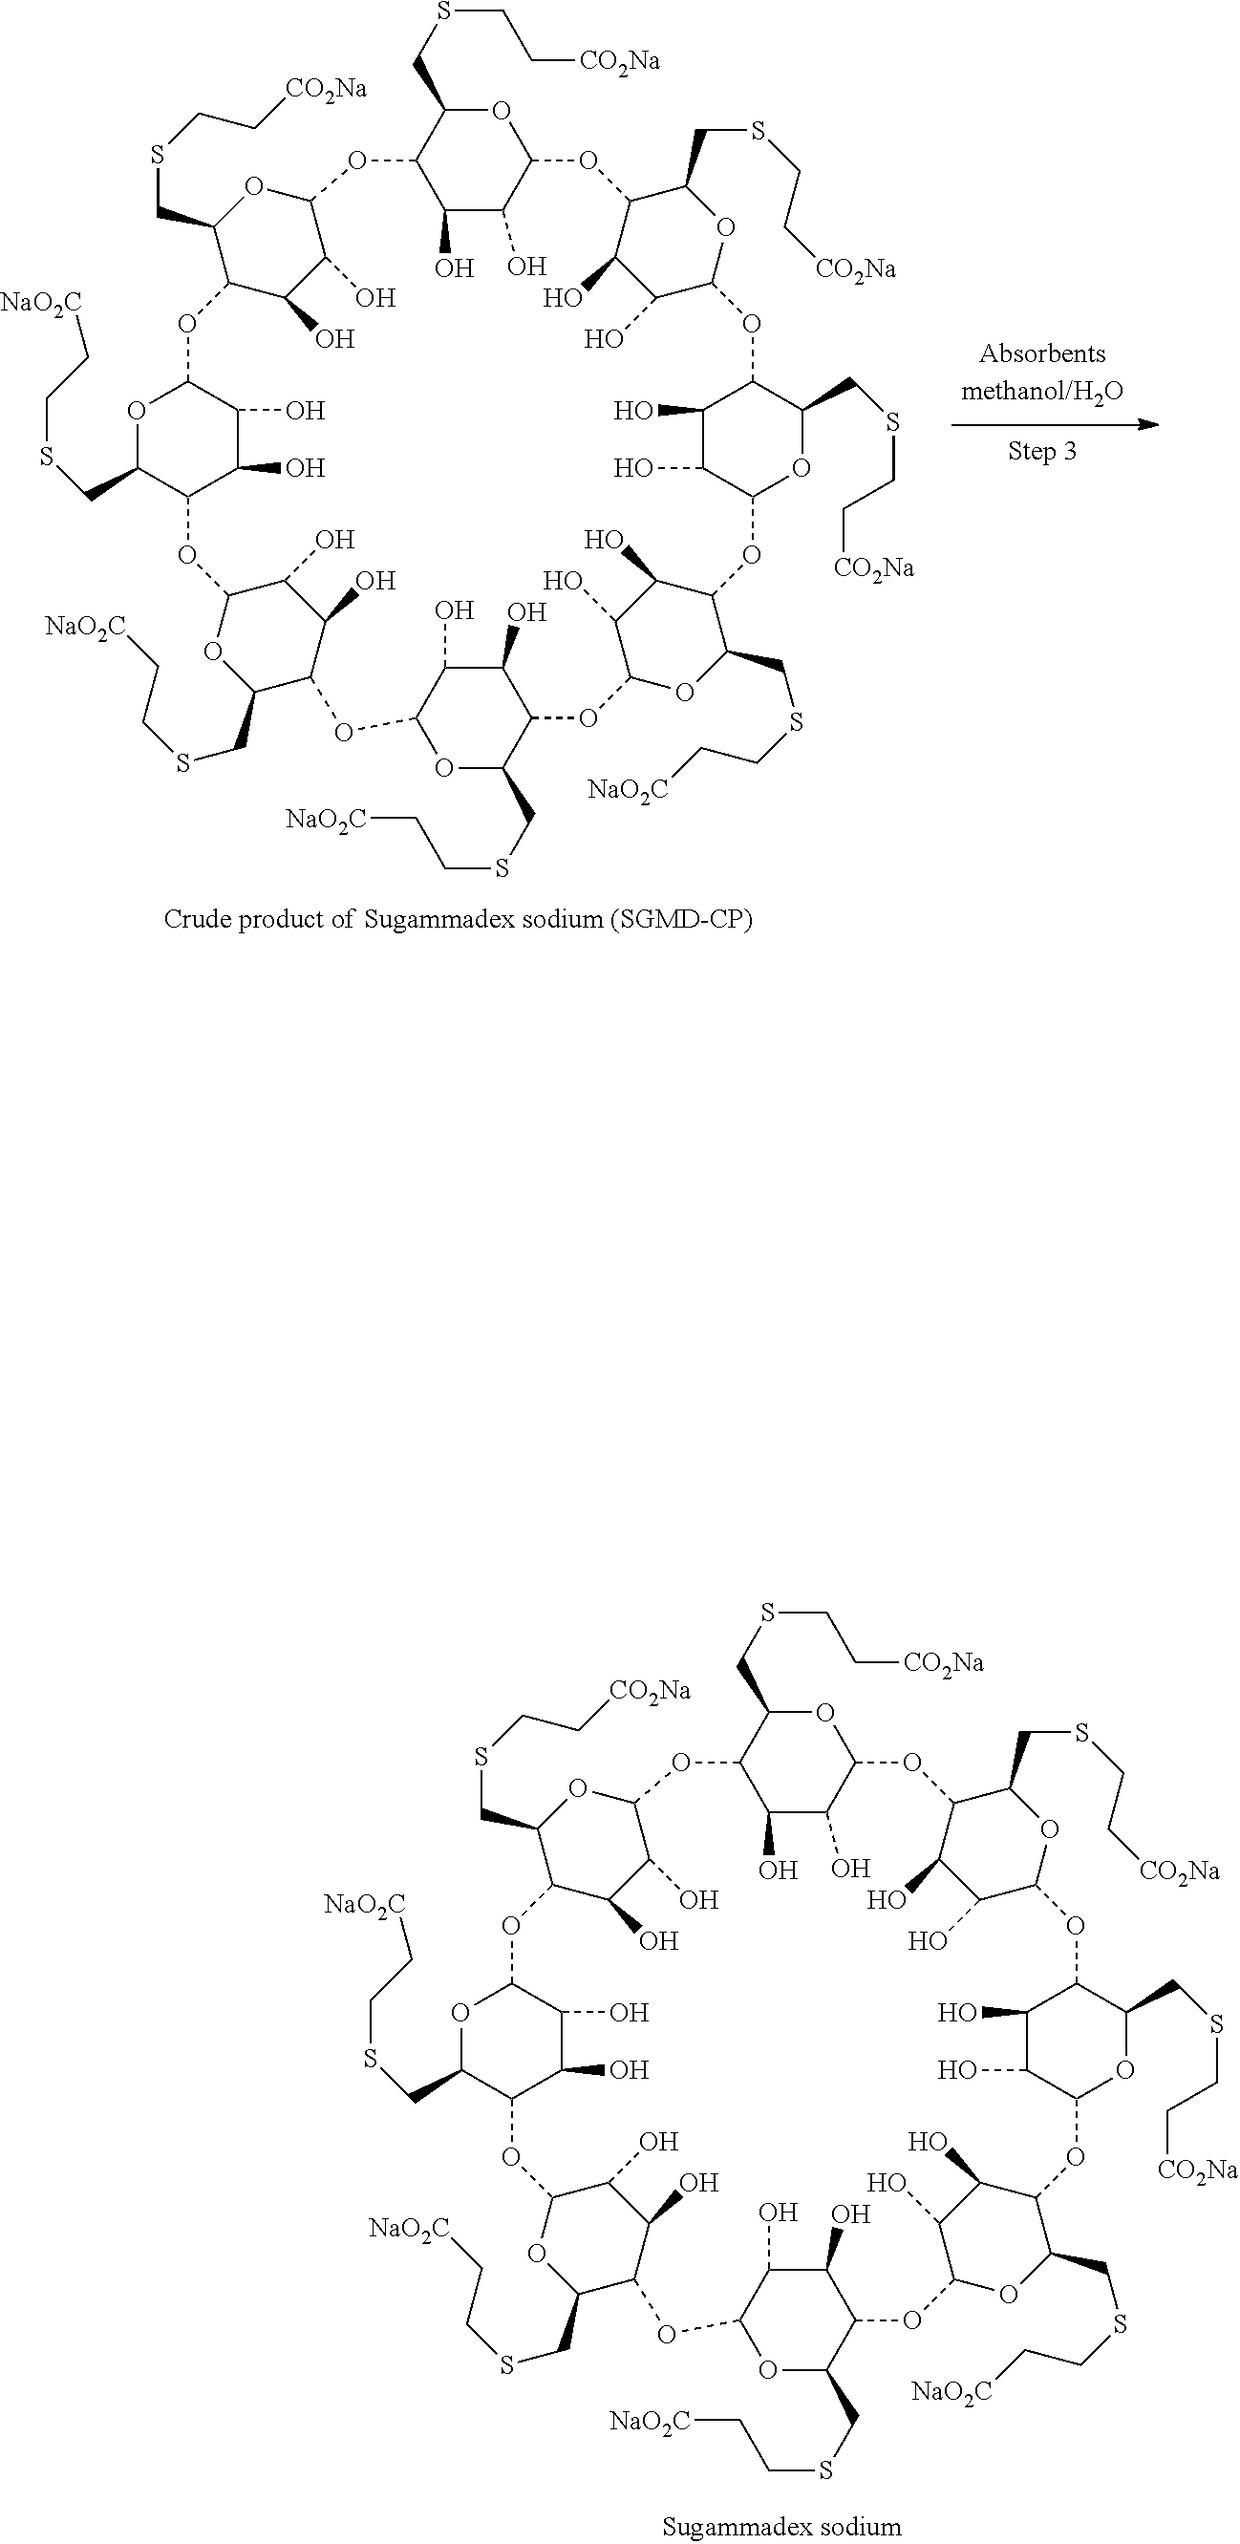 Process for preparation and purification of sugammades sodium